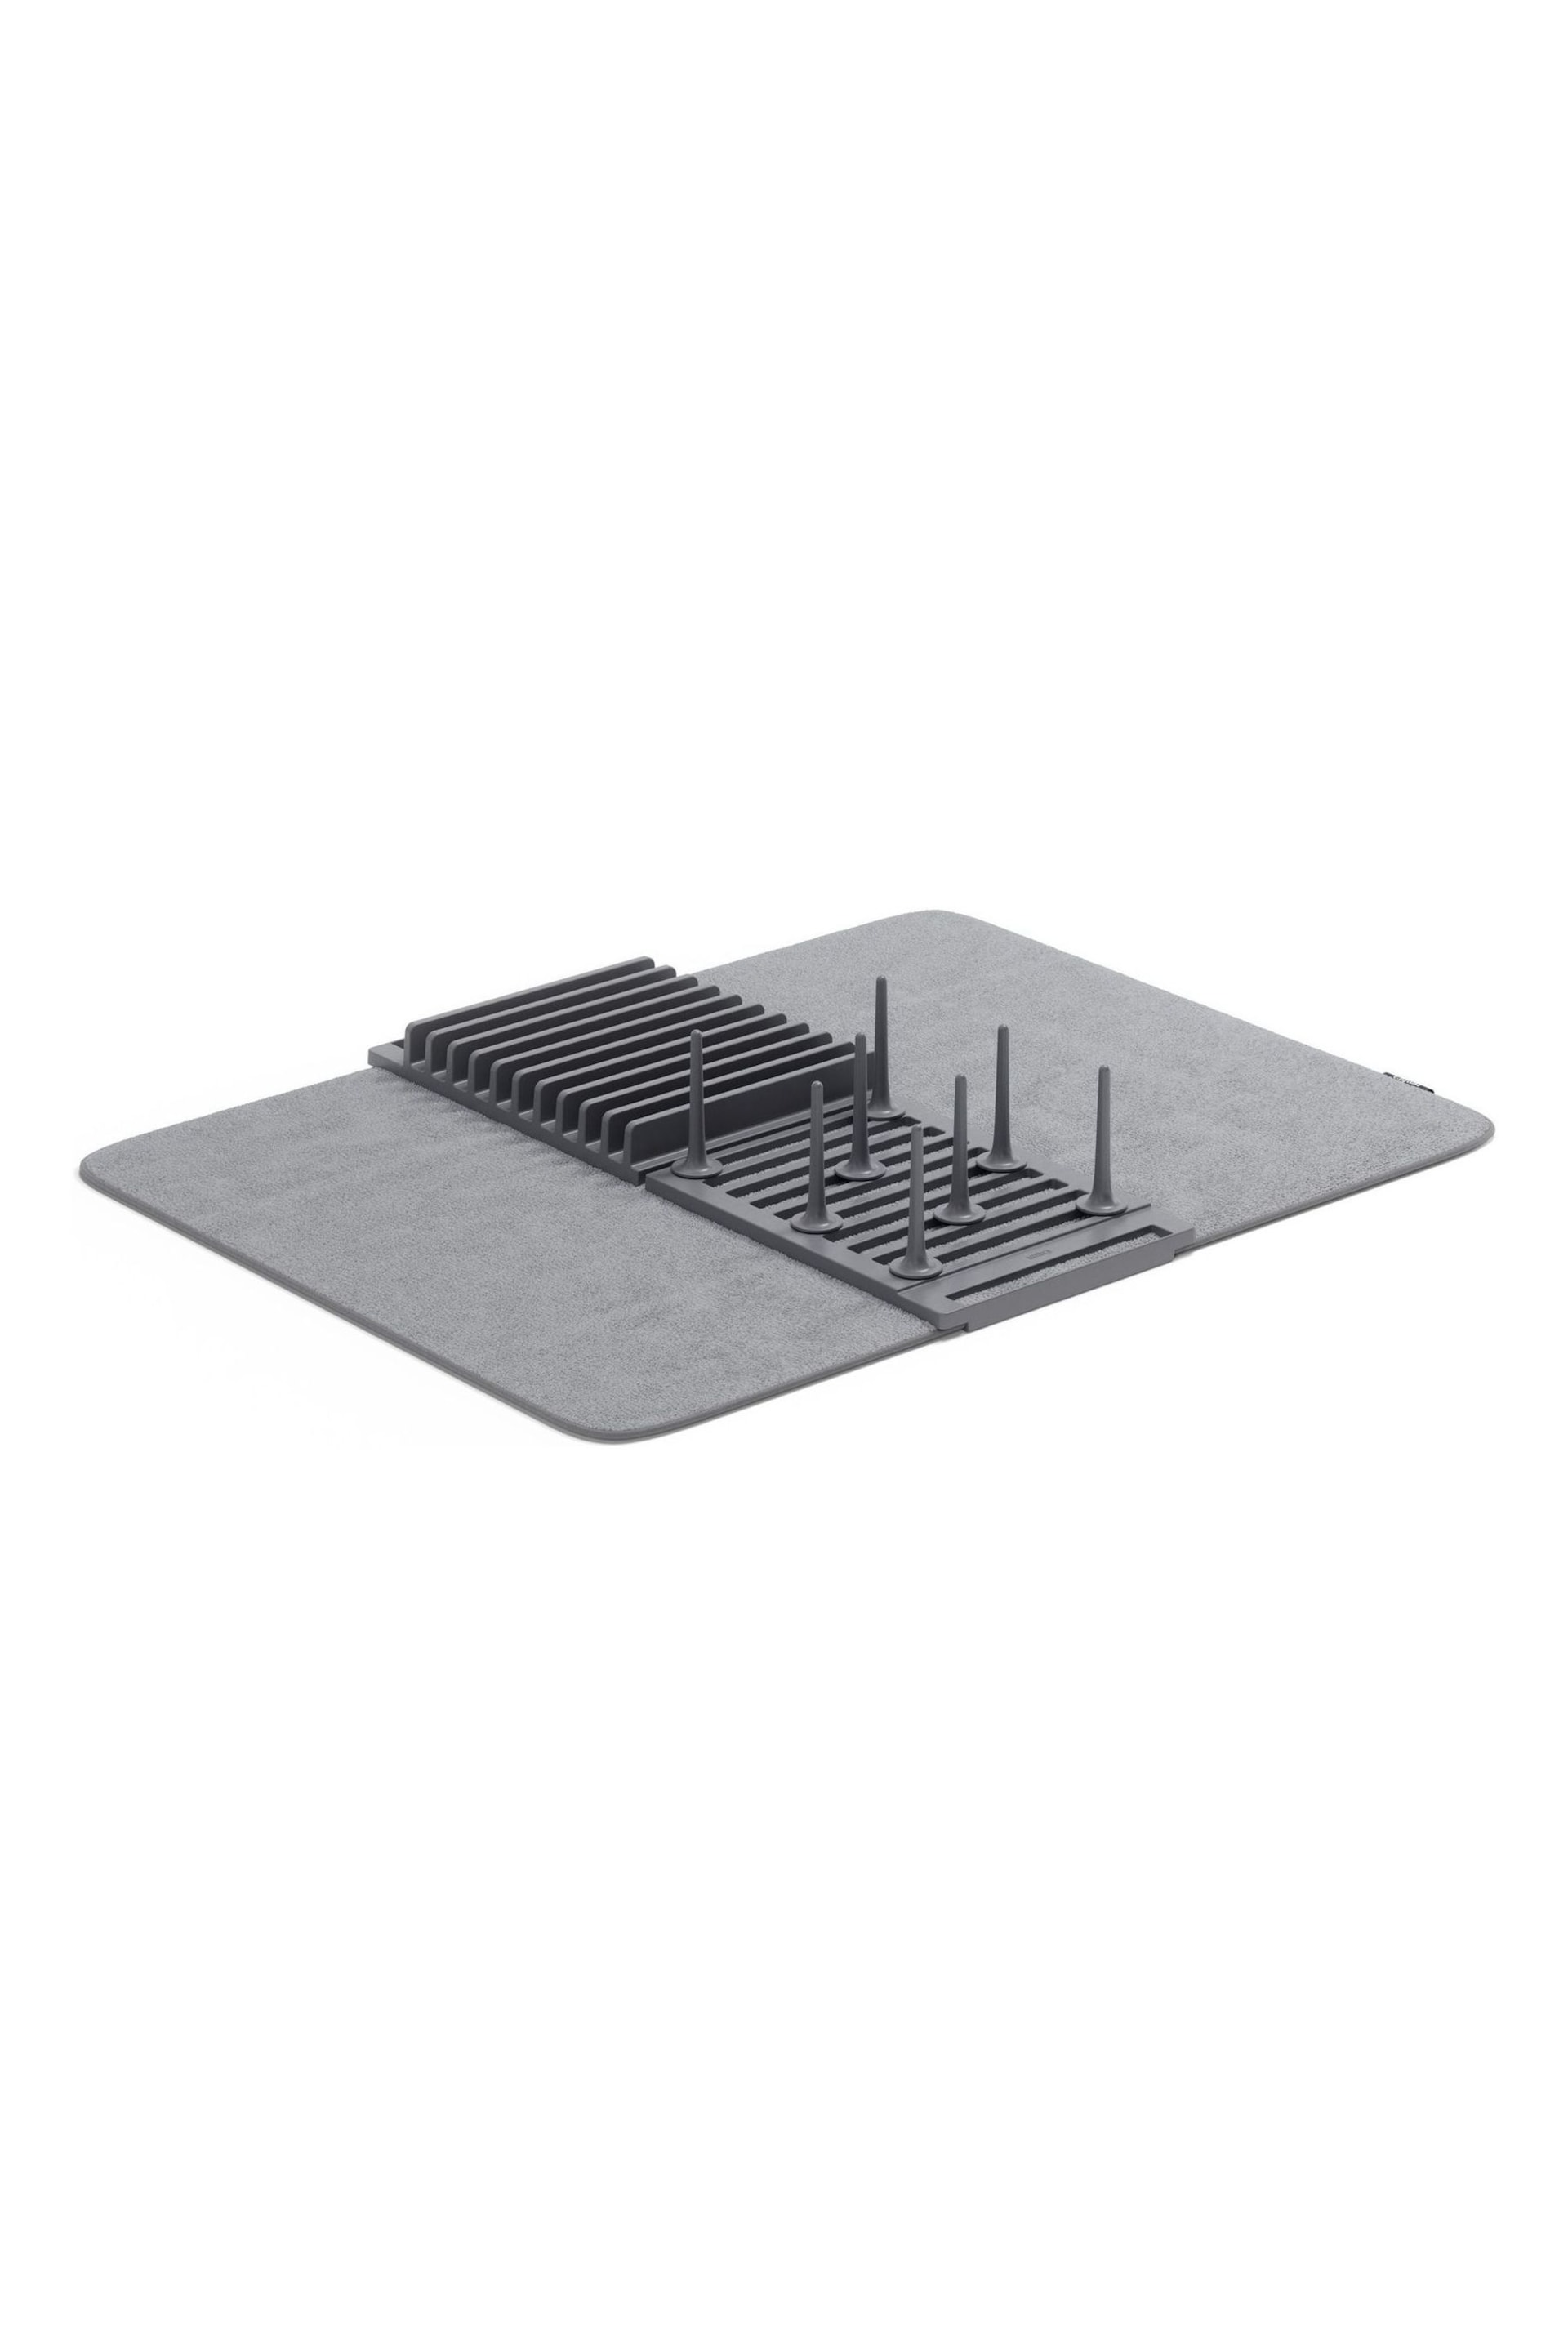 Umbra Grey UDry Drying Rack with Mat - Image 3 of 6